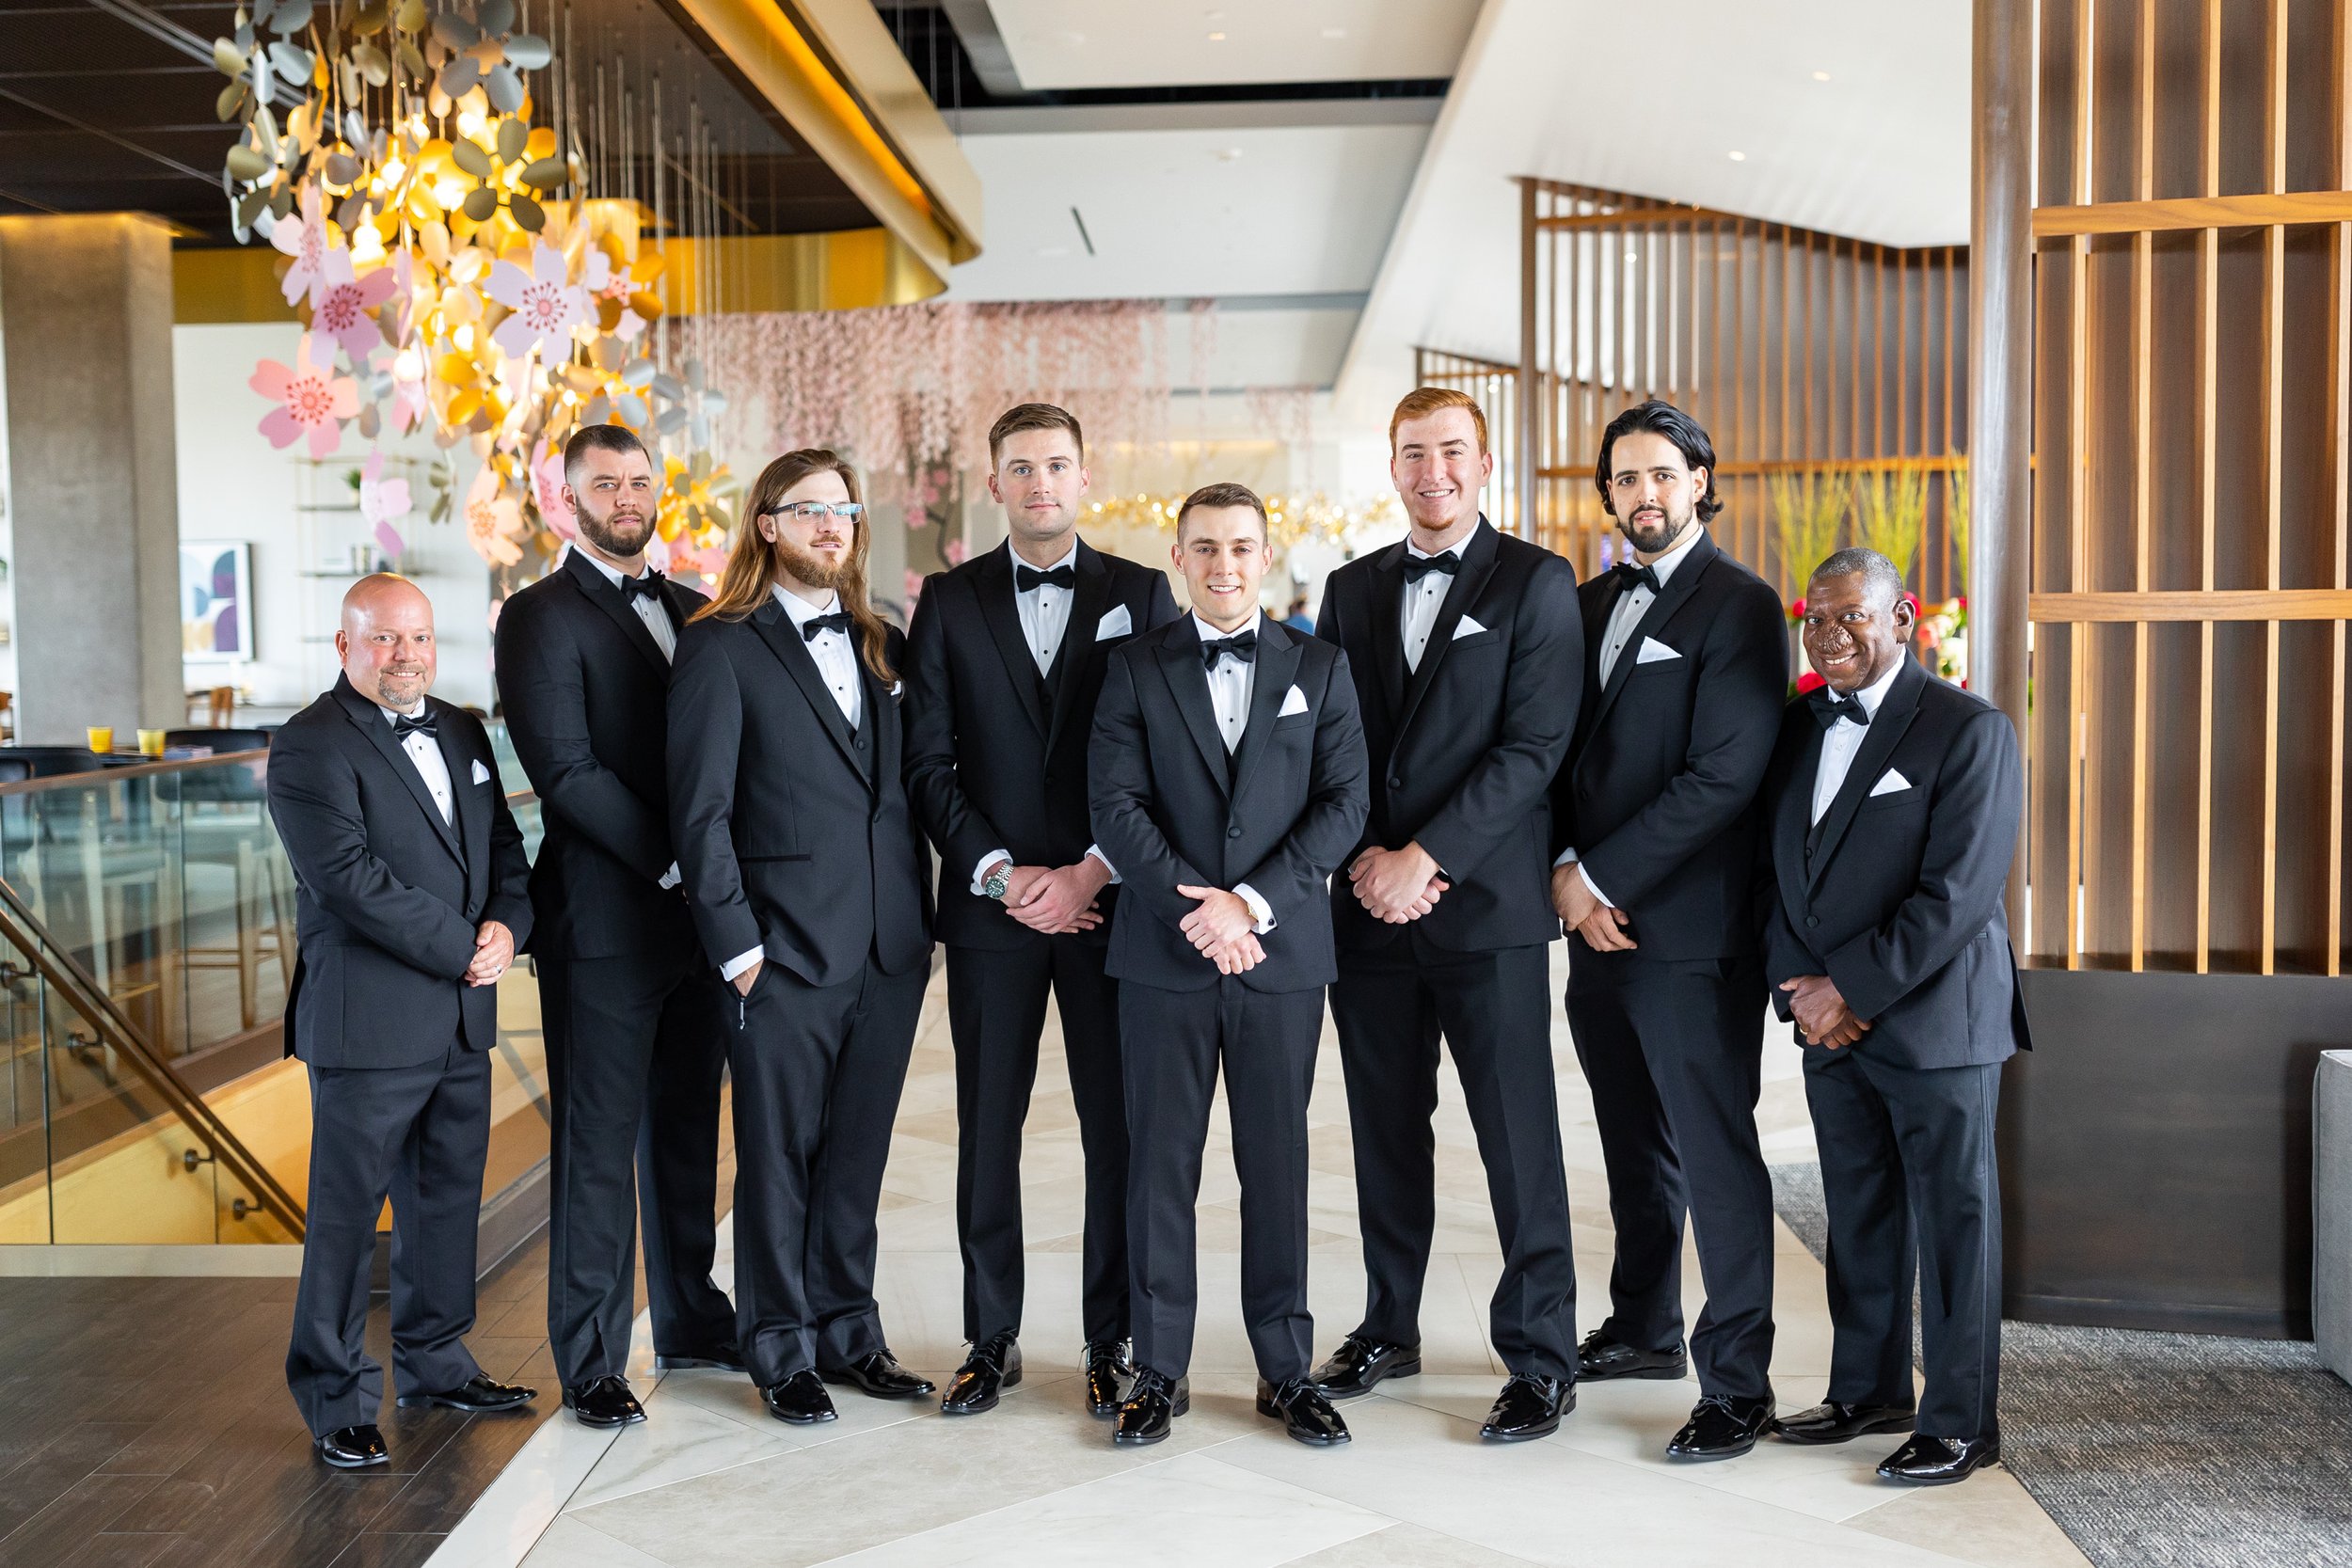 Groom and groomsmen pose for wedding portraits in lobby at Watermark Hotel